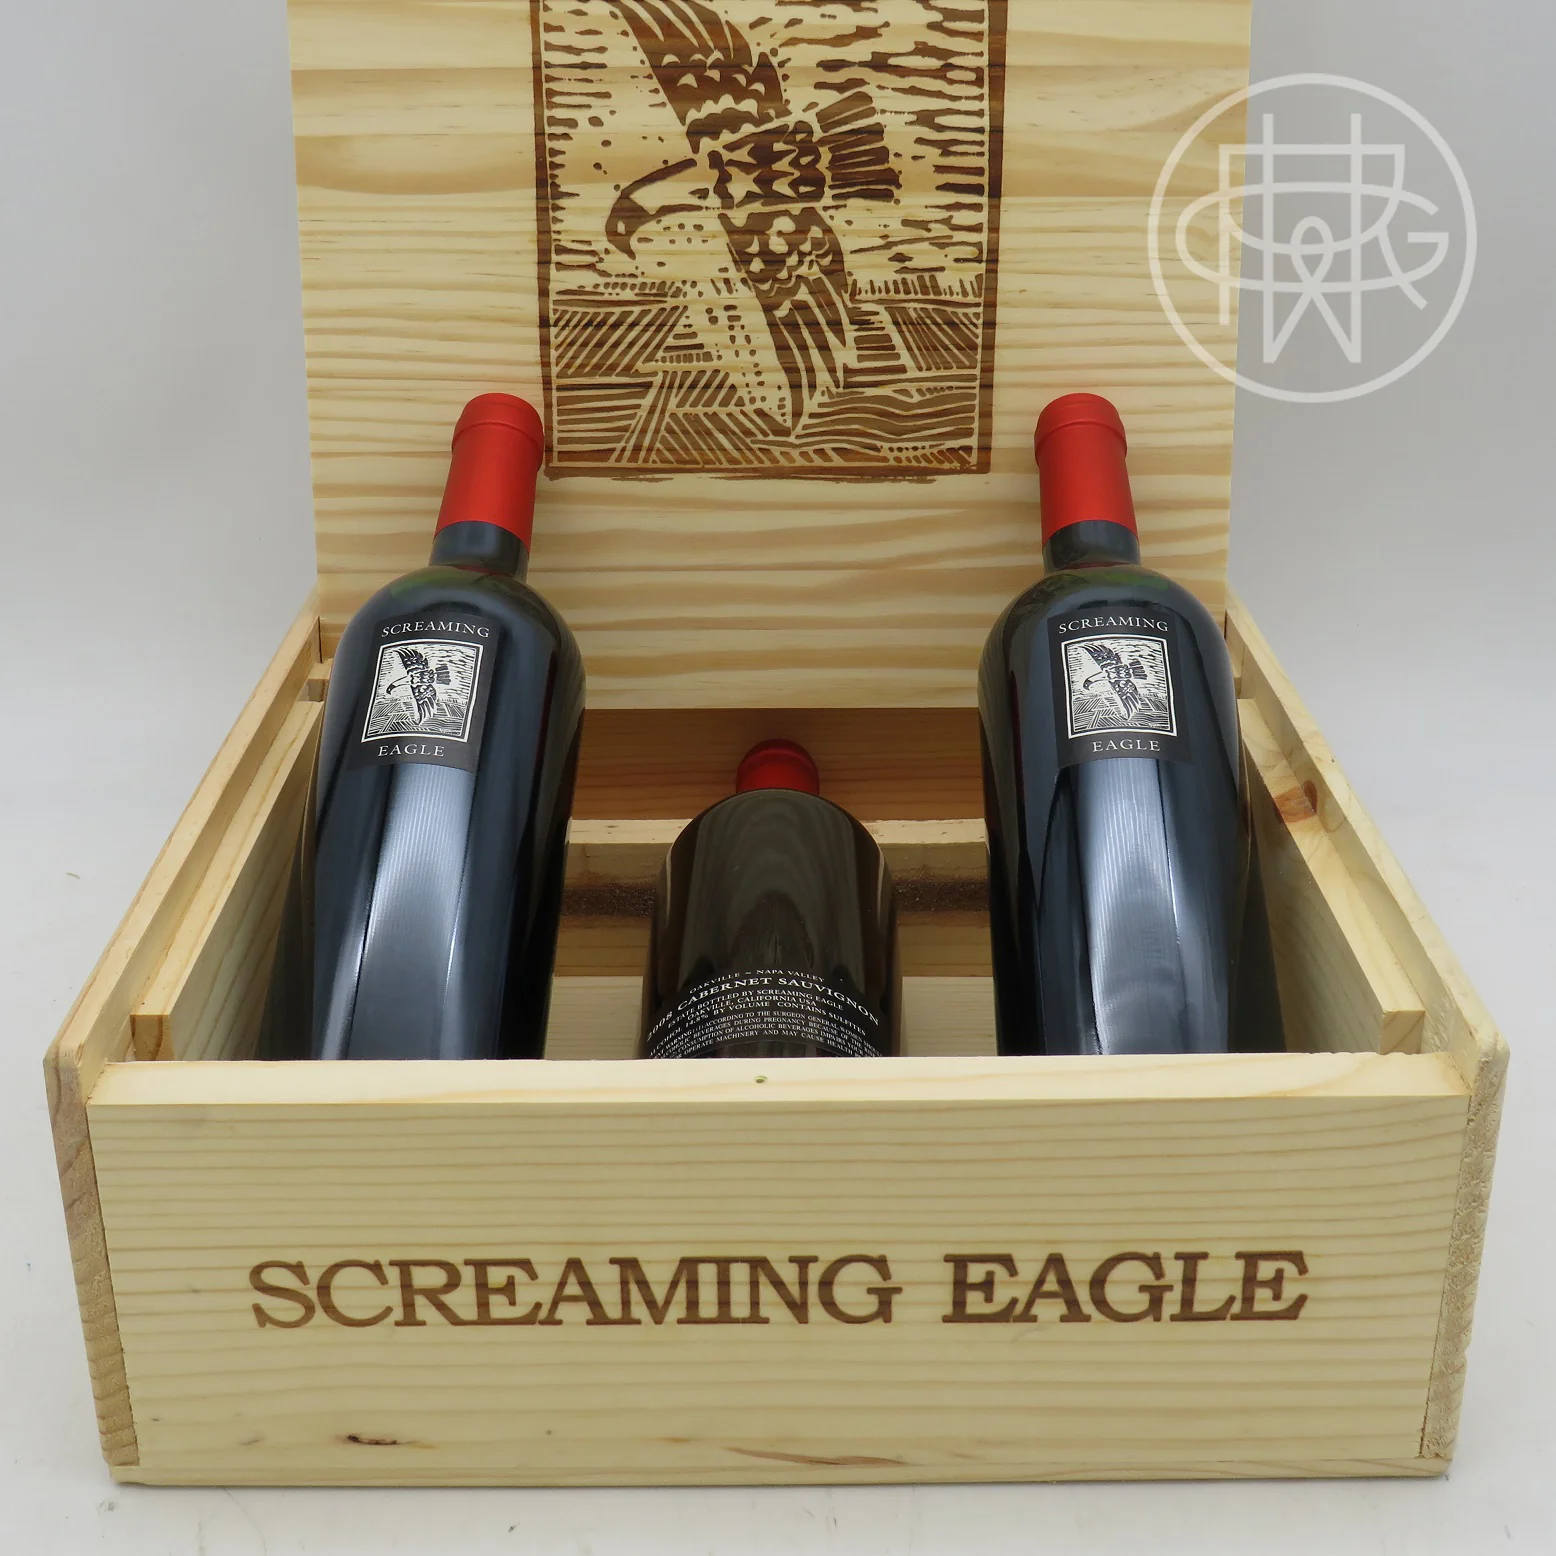 Screaming Eagle Wine, embodying sophistication and rarity in the realm of fine wines, a true symbol of vinicultural luxury.